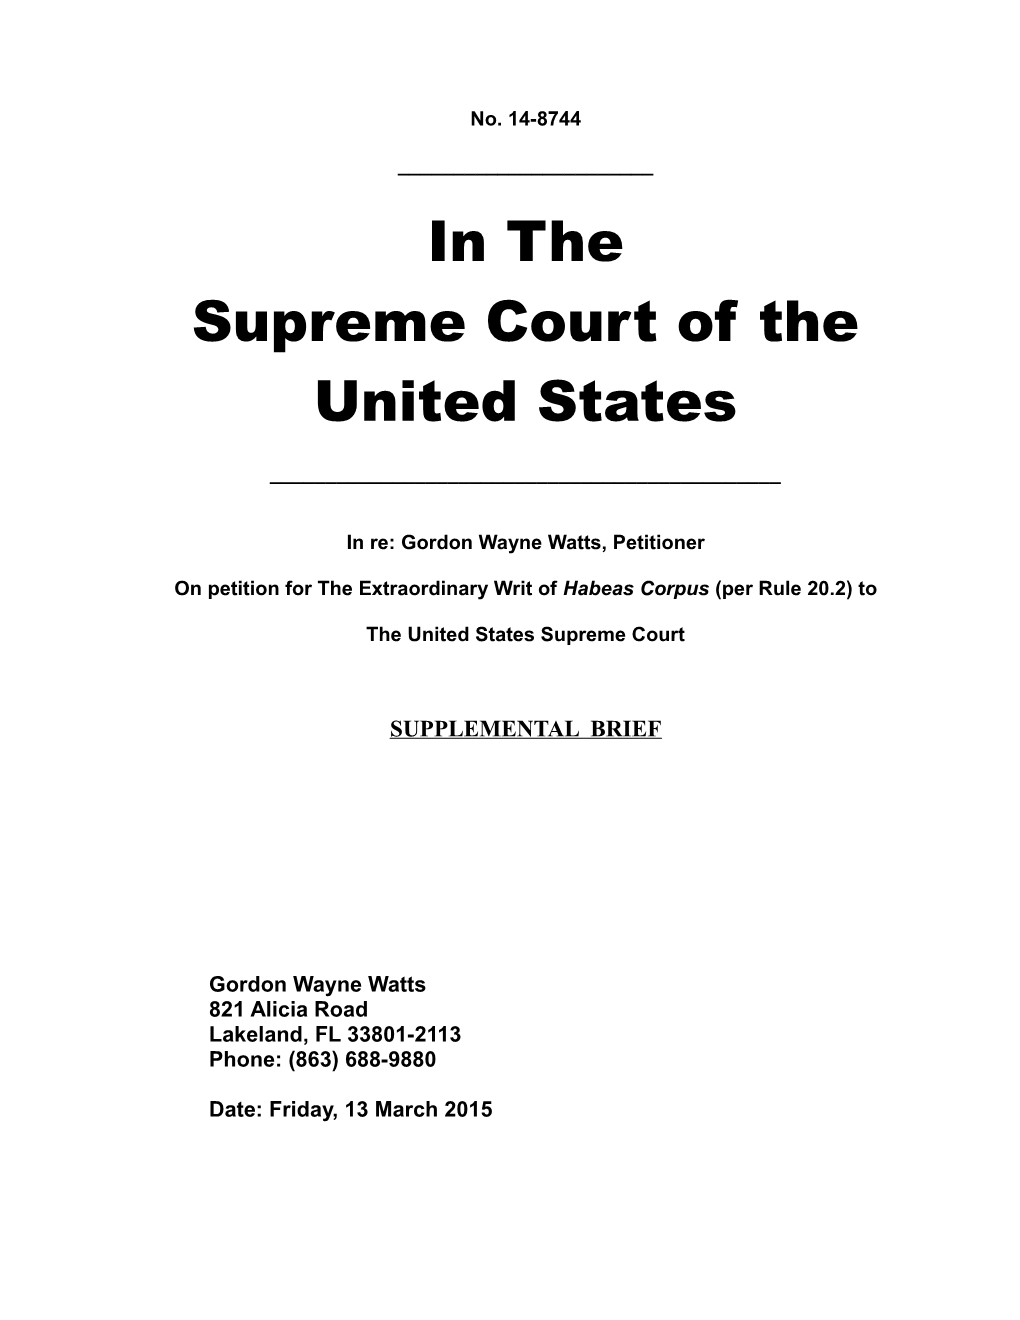 Supreme Court of the United States s10